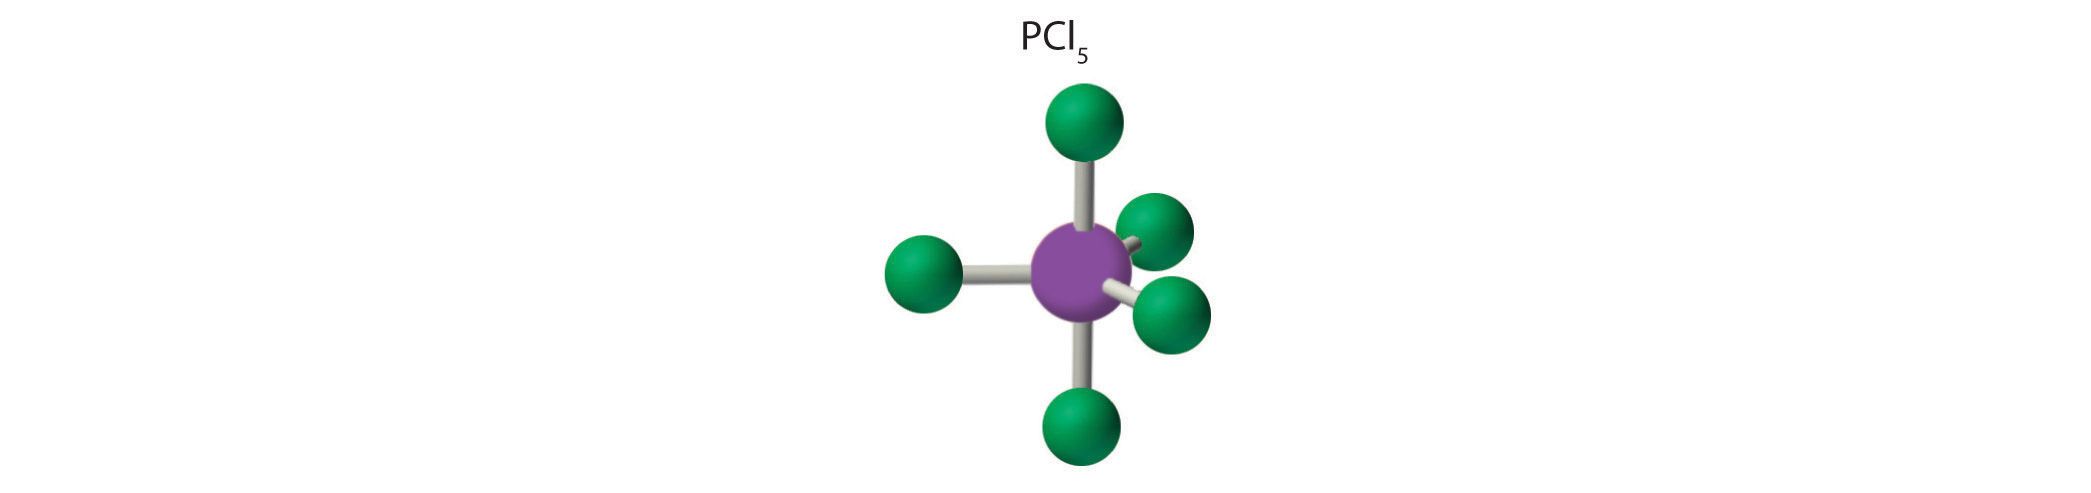 Predicting the Geometry of Molecules and Polyatomic Ions